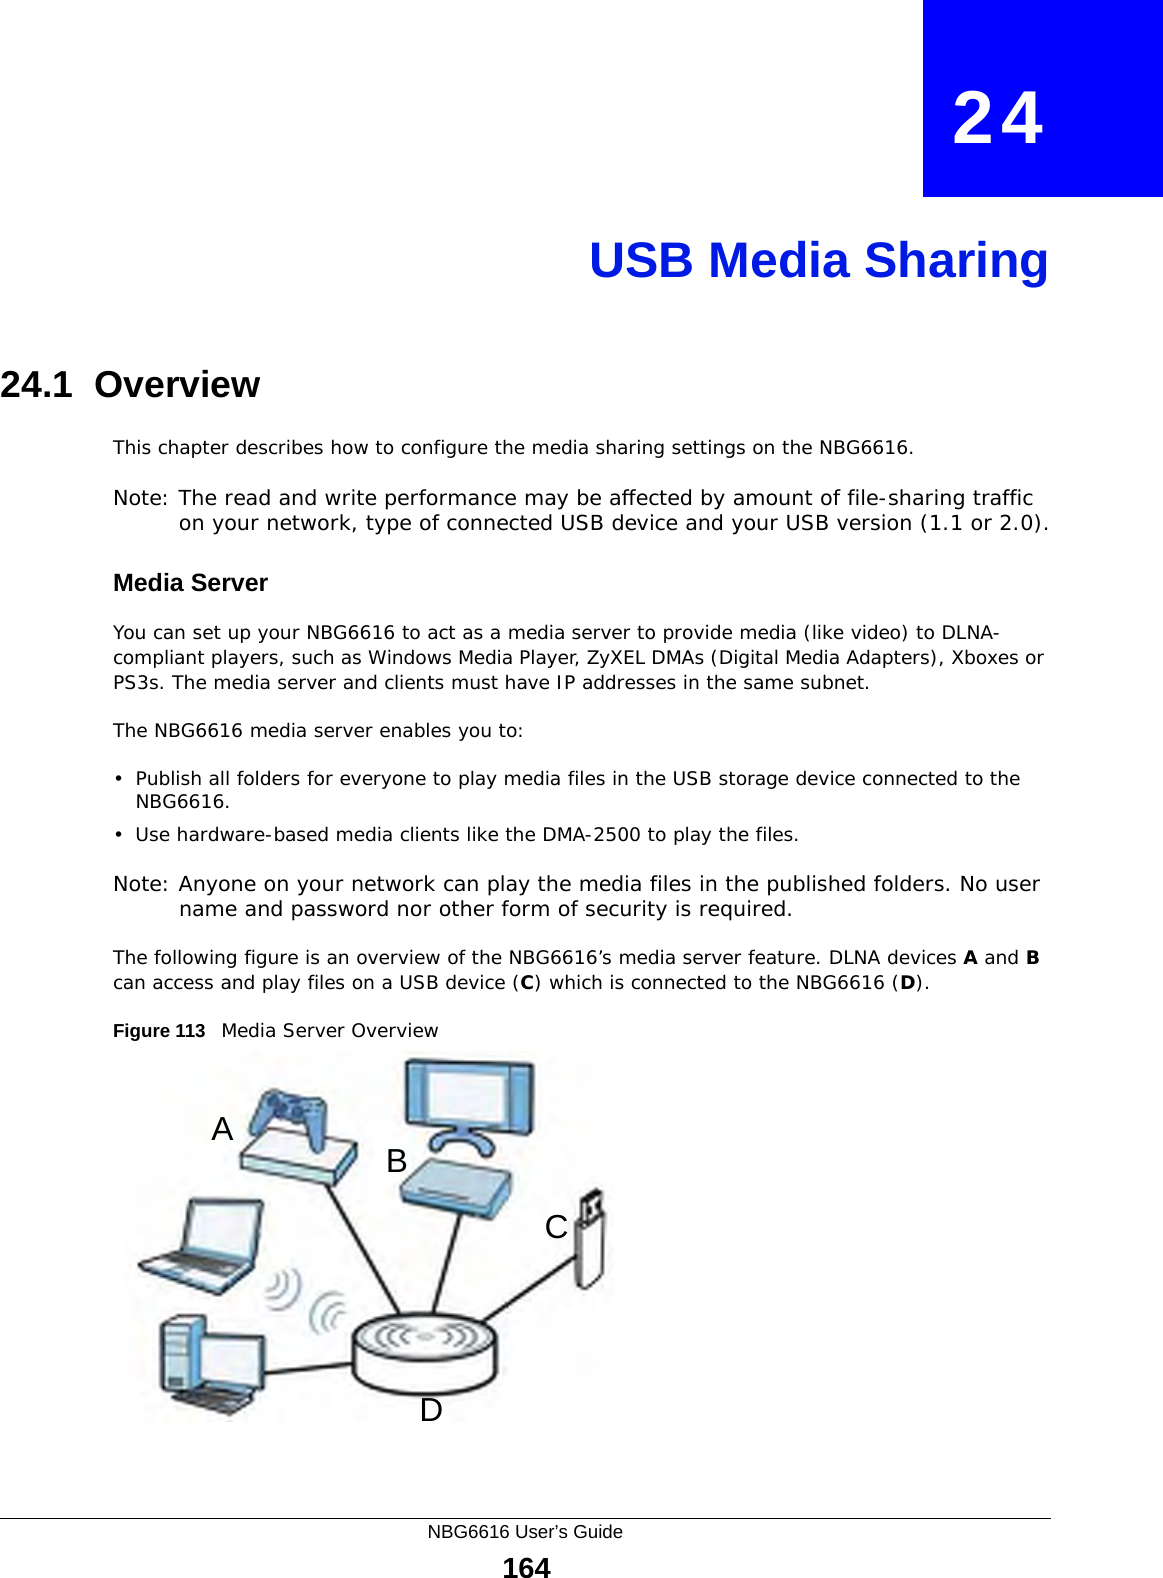 NBG6616 User’s Guide164CHAPTER   24USB Media Sharing24.1  OverviewThis chapter describes how to configure the media sharing settings on the NBG6616.Note: The read and write performance may be affected by amount of file-sharing traffic on your network, type of connected USB device and your USB version (1.1 or 2.0).Media ServerYou can set up your NBG6616 to act as a media server to provide media (like video) to DLNA-compliant players, such as Windows Media Player, ZyXEL DMAs (Digital Media Adapters), Xboxes or PS3s. The media server and clients must have IP addresses in the same subnet.The NBG6616 media server enables you to:• Publish all folders for everyone to play media files in the USB storage device connected to the NBG6616.• Use hardware-based media clients like the DMA-2500 to play the files.Note: Anyone on your network can play the media files in the published folders. No user name and password nor other form of security is required. The following figure is an overview of the NBG6616’s media server feature. DLNA devices A and B can access and play files on a USB device (C) which is connected to the NBG6616 (D).Figure 113   Media Server OverviewABCD